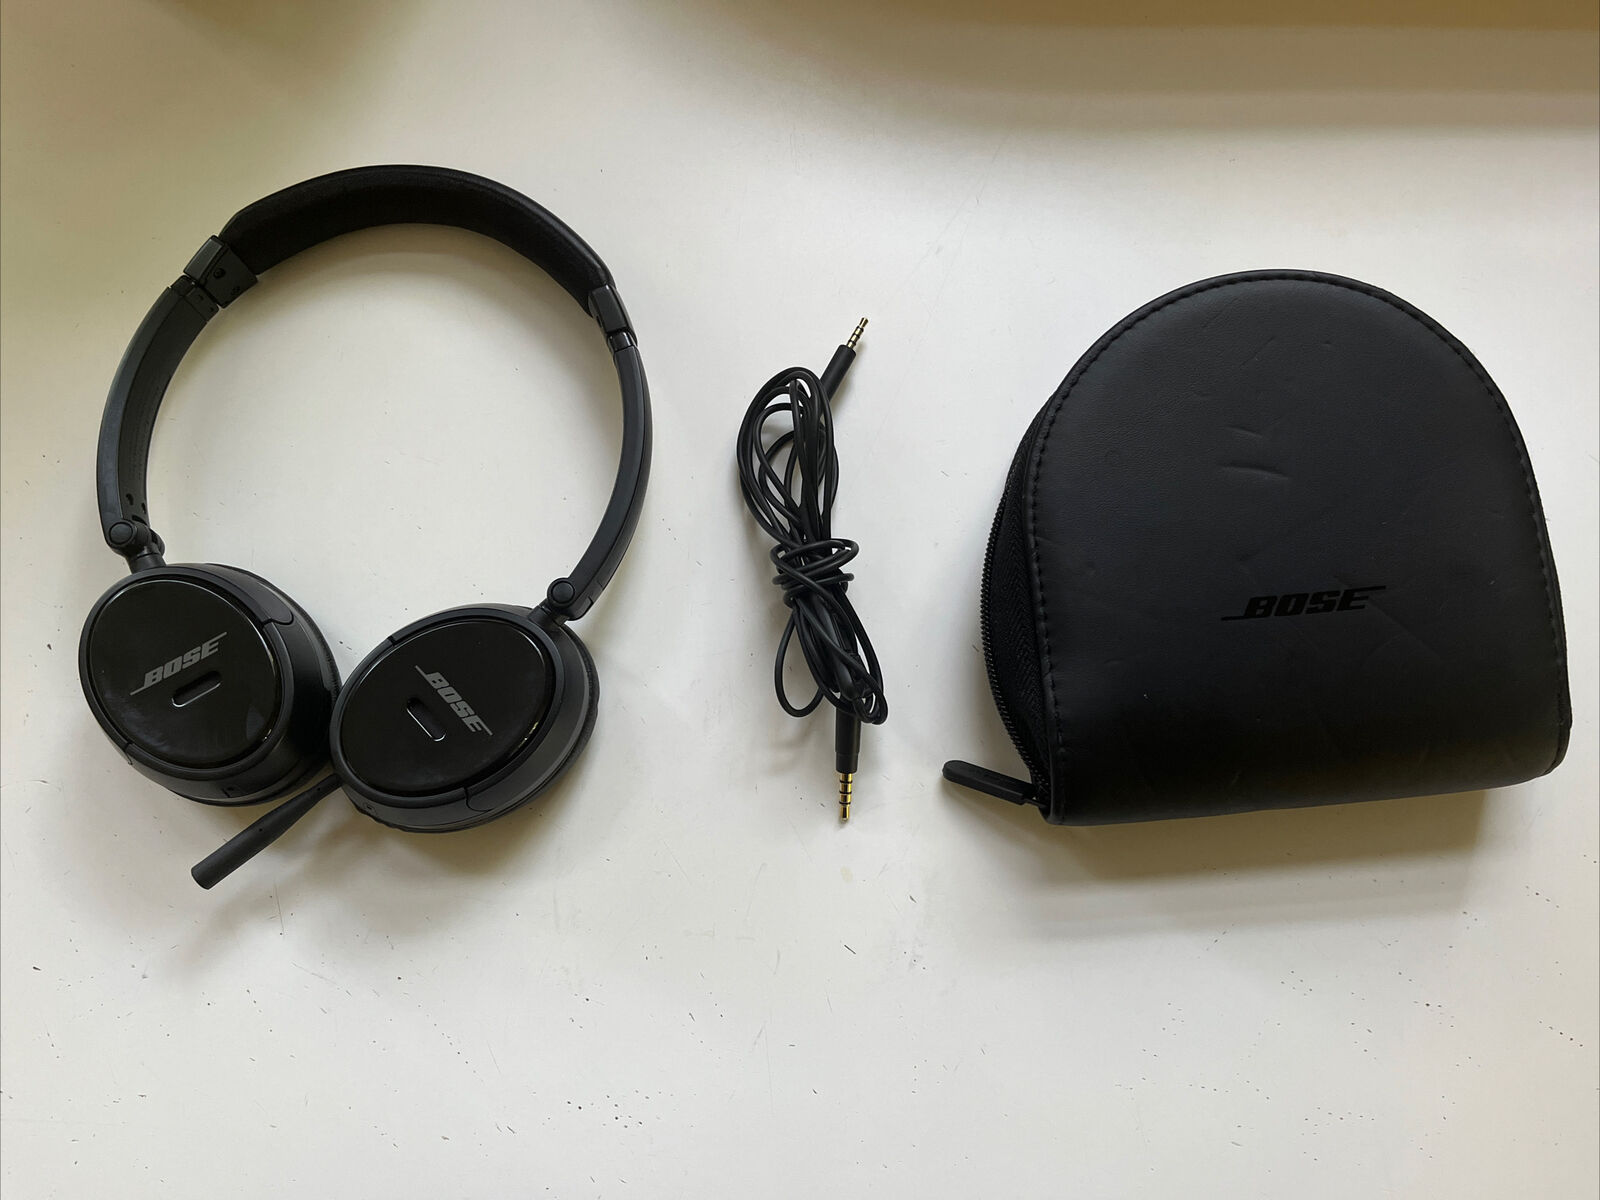 What Is The Toughest Audio Cable For A Bose Oe2 Head Set